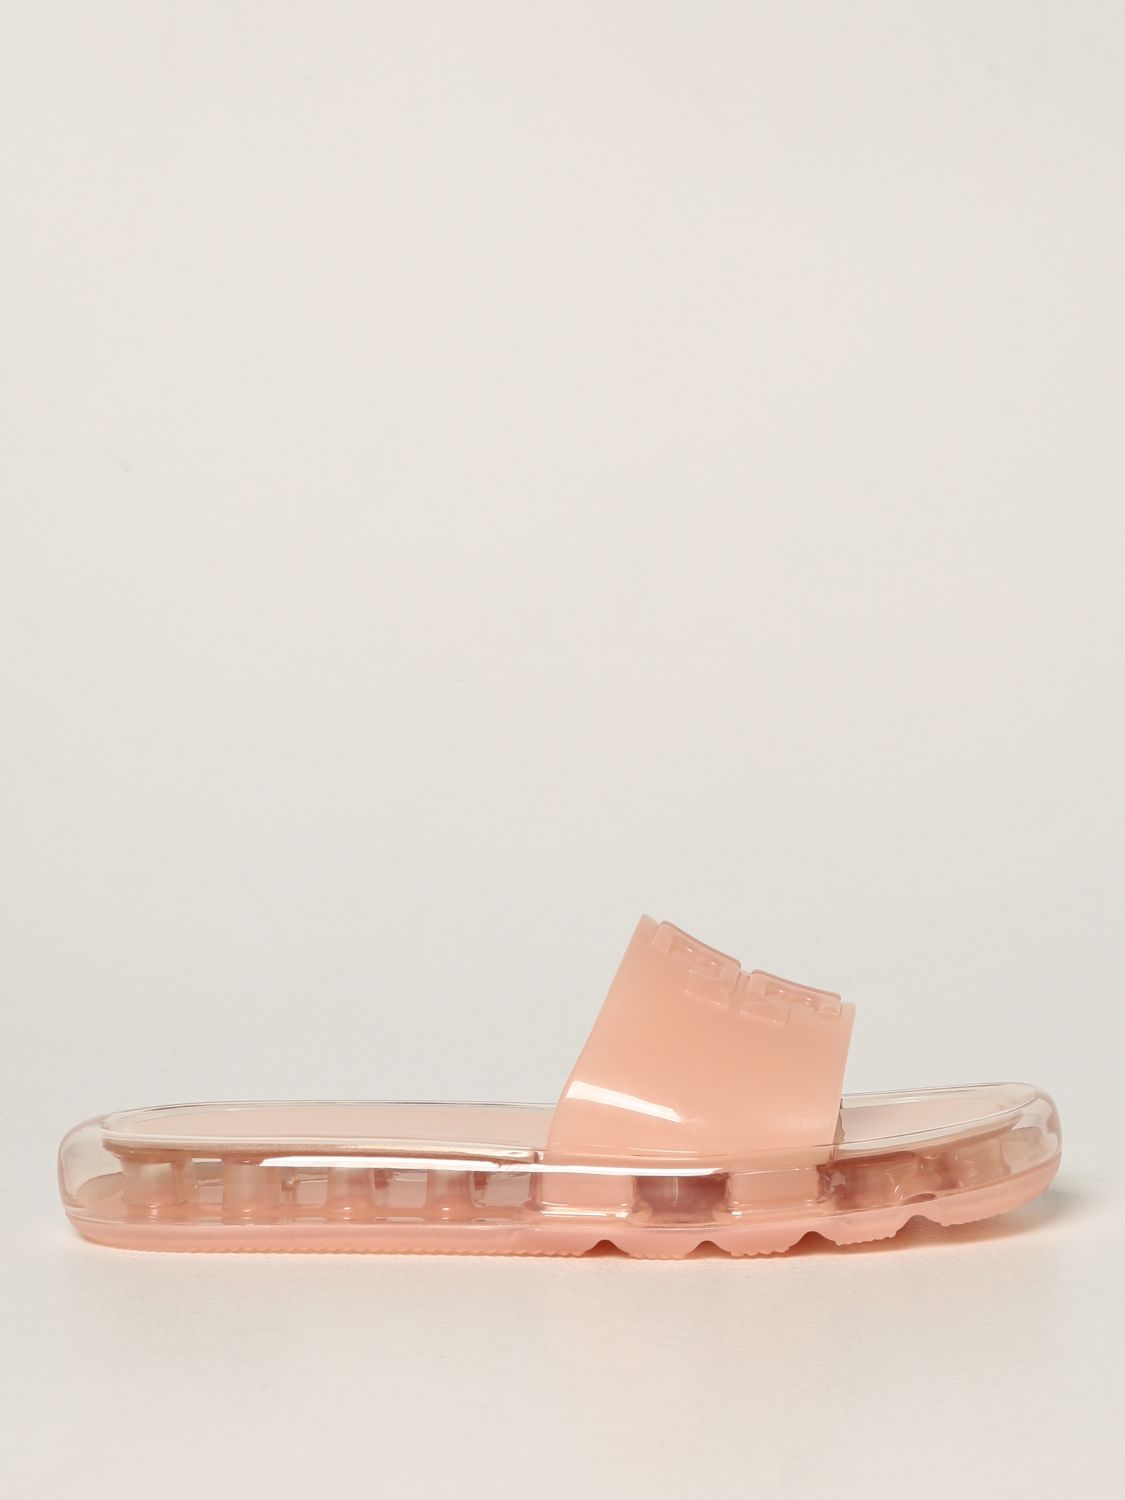 TORY BURCH: Bubble Jelly sandal in TPU - Pink | Tory Burch flat sandals  85010 online on 